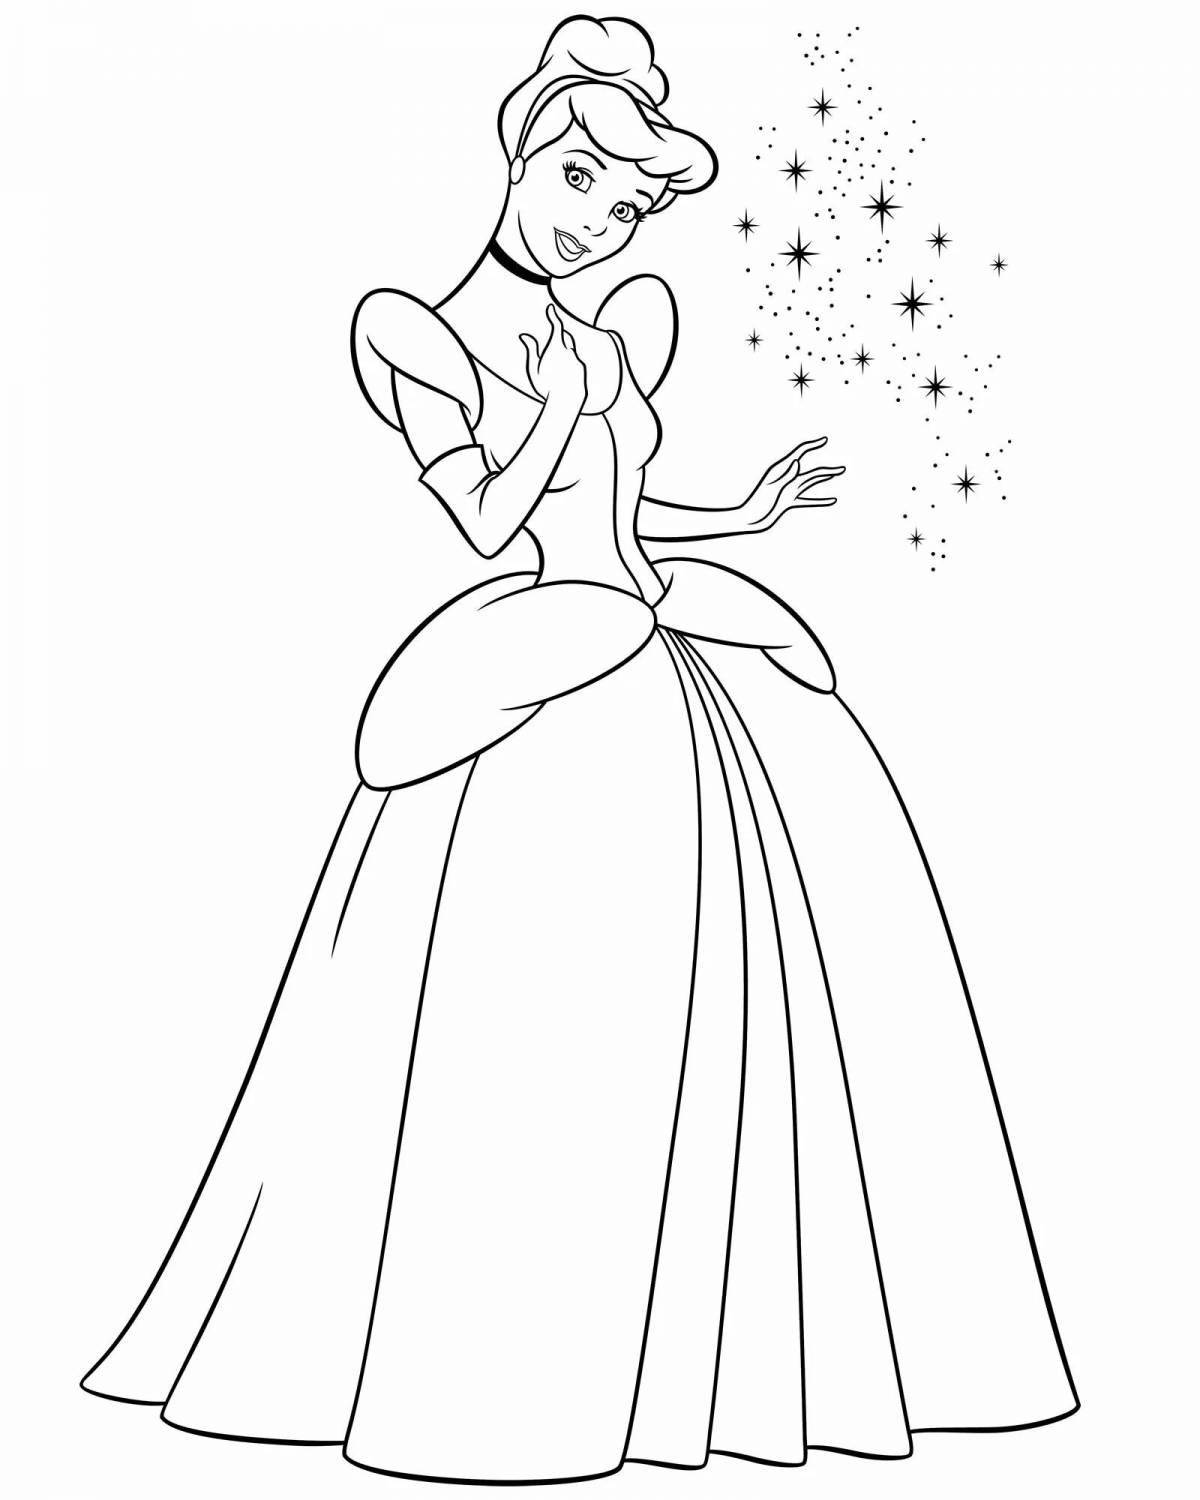 Exquisite Cinderella coloring book for kids 5-6 years old